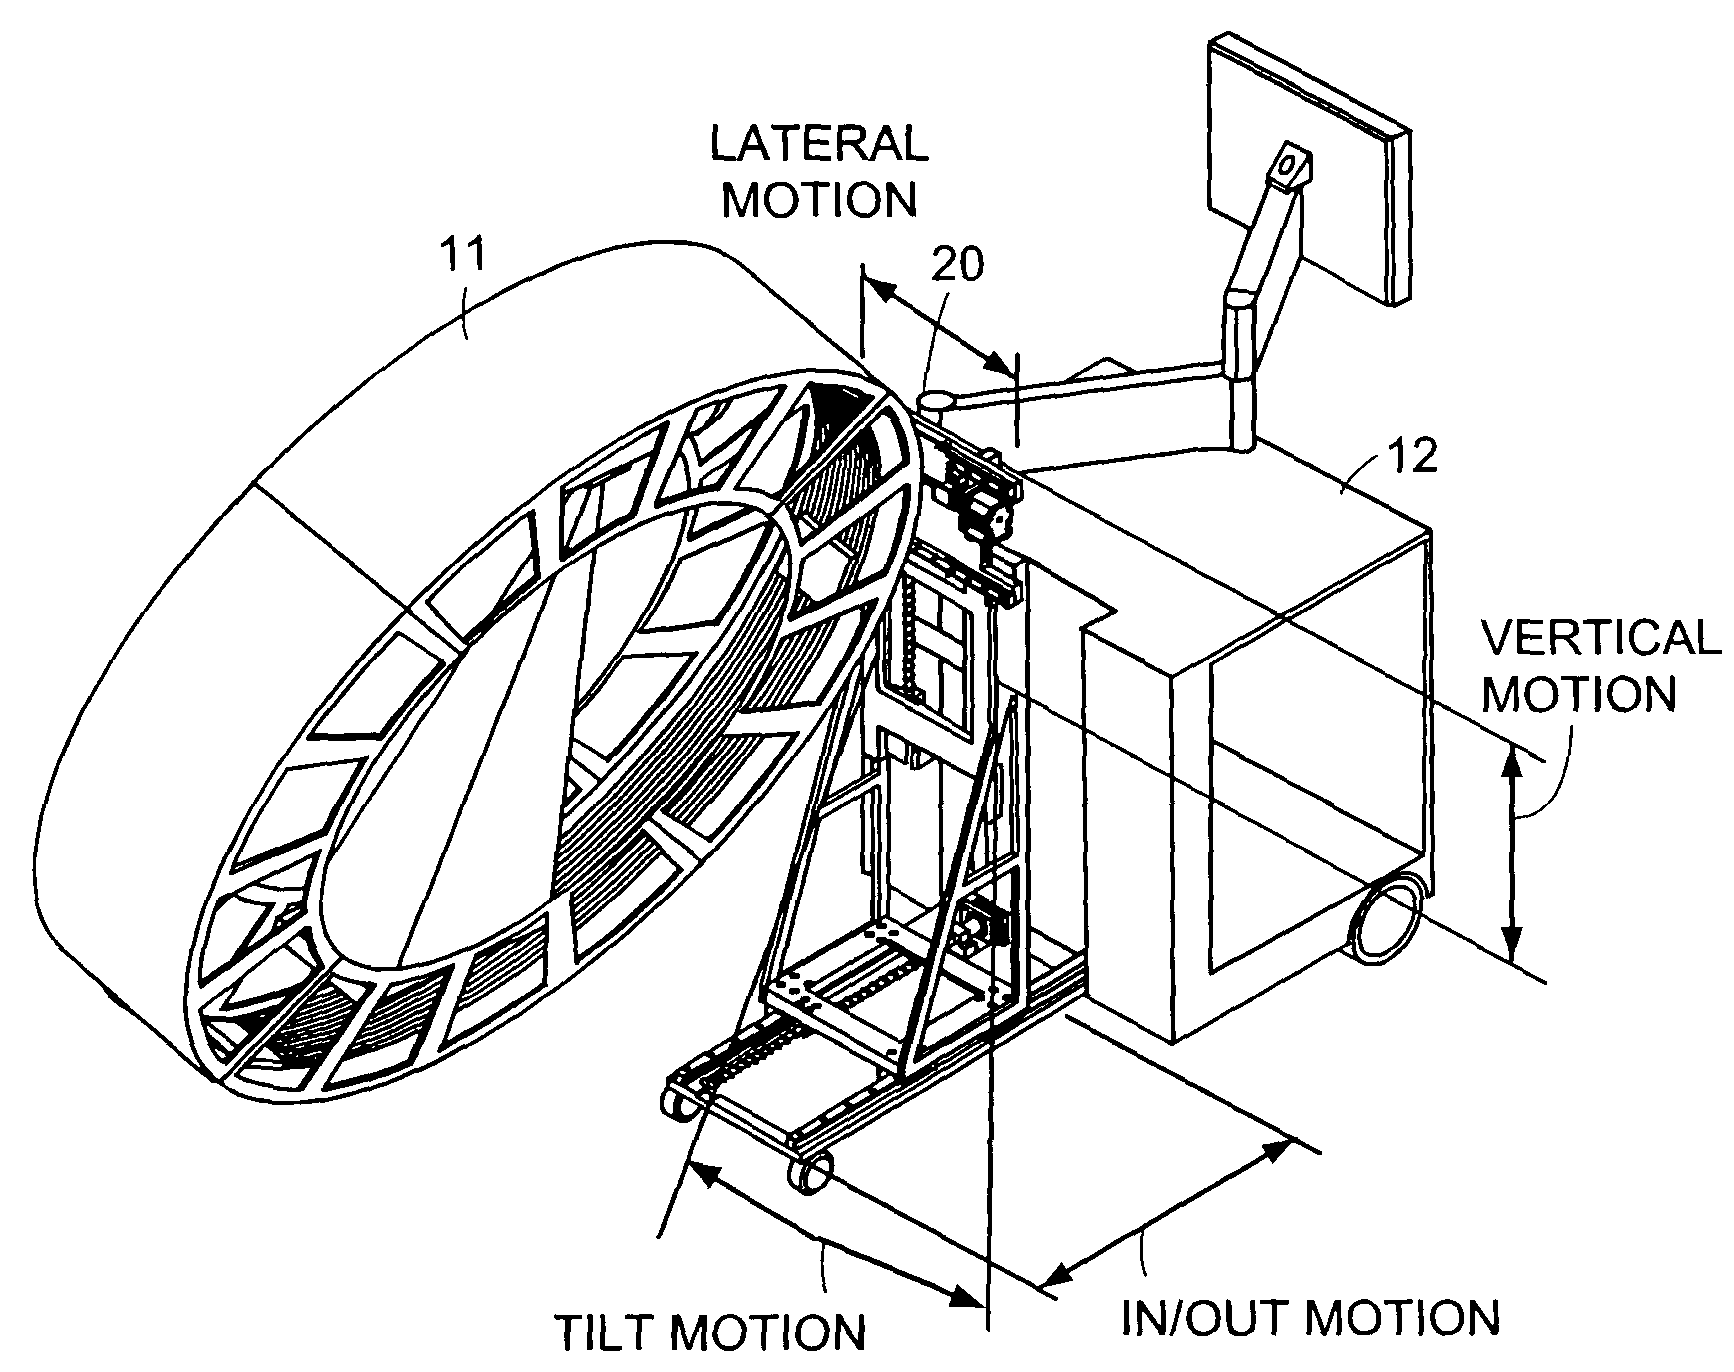 Cantilevered gantry apparatus for x-ray imaging